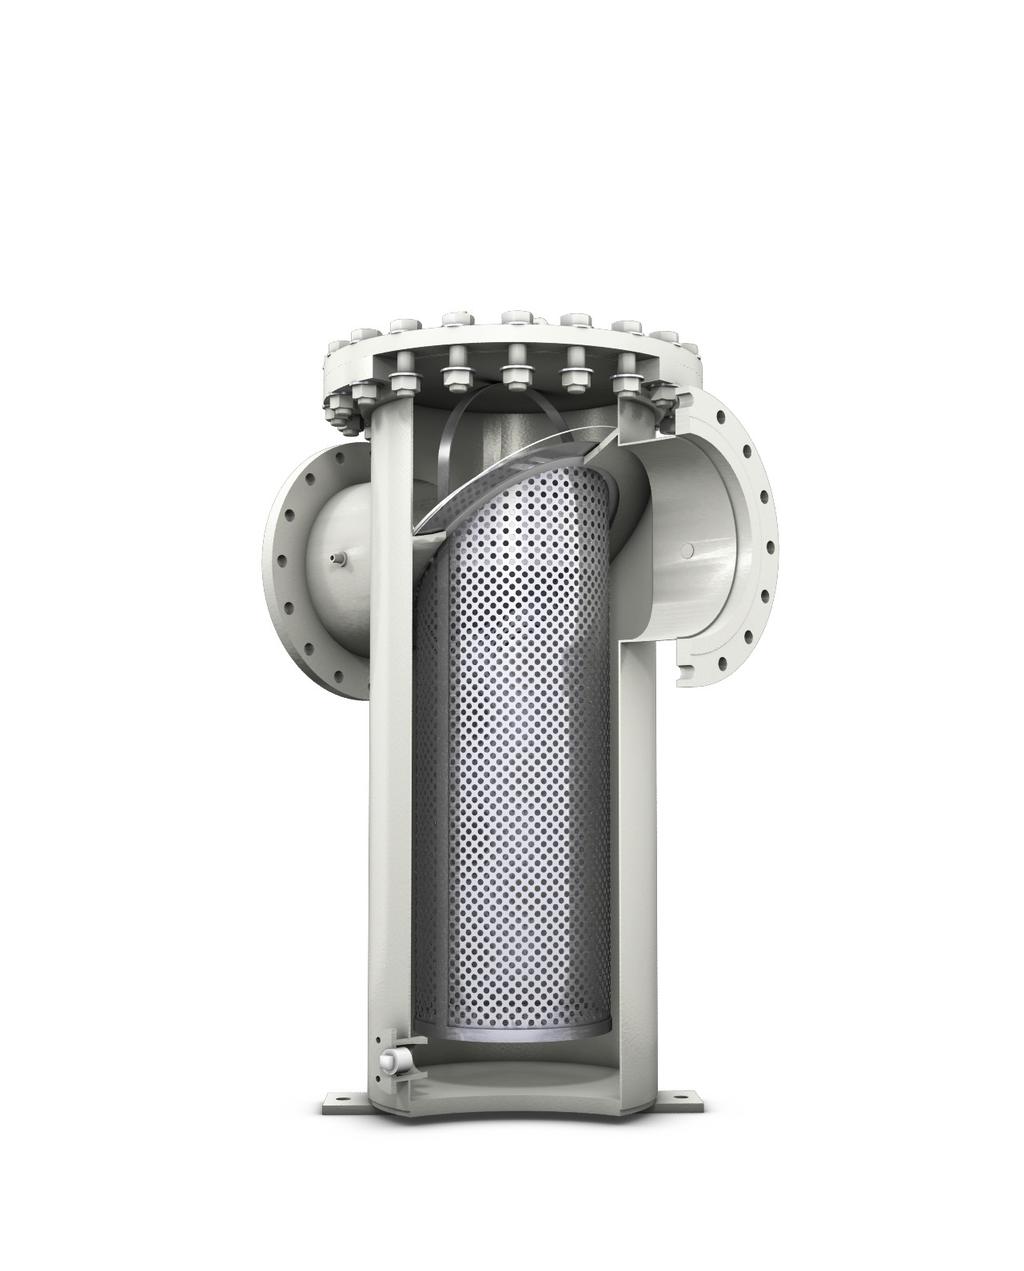 S.P. KINNEY MODEL FF AND CUSTOM STRAINERS APPLICATIONS S.P. Kinney offers a wide range of custom manual and automatic designs to meet any dimensional, pressure, or temperature requirements that a customer may have.